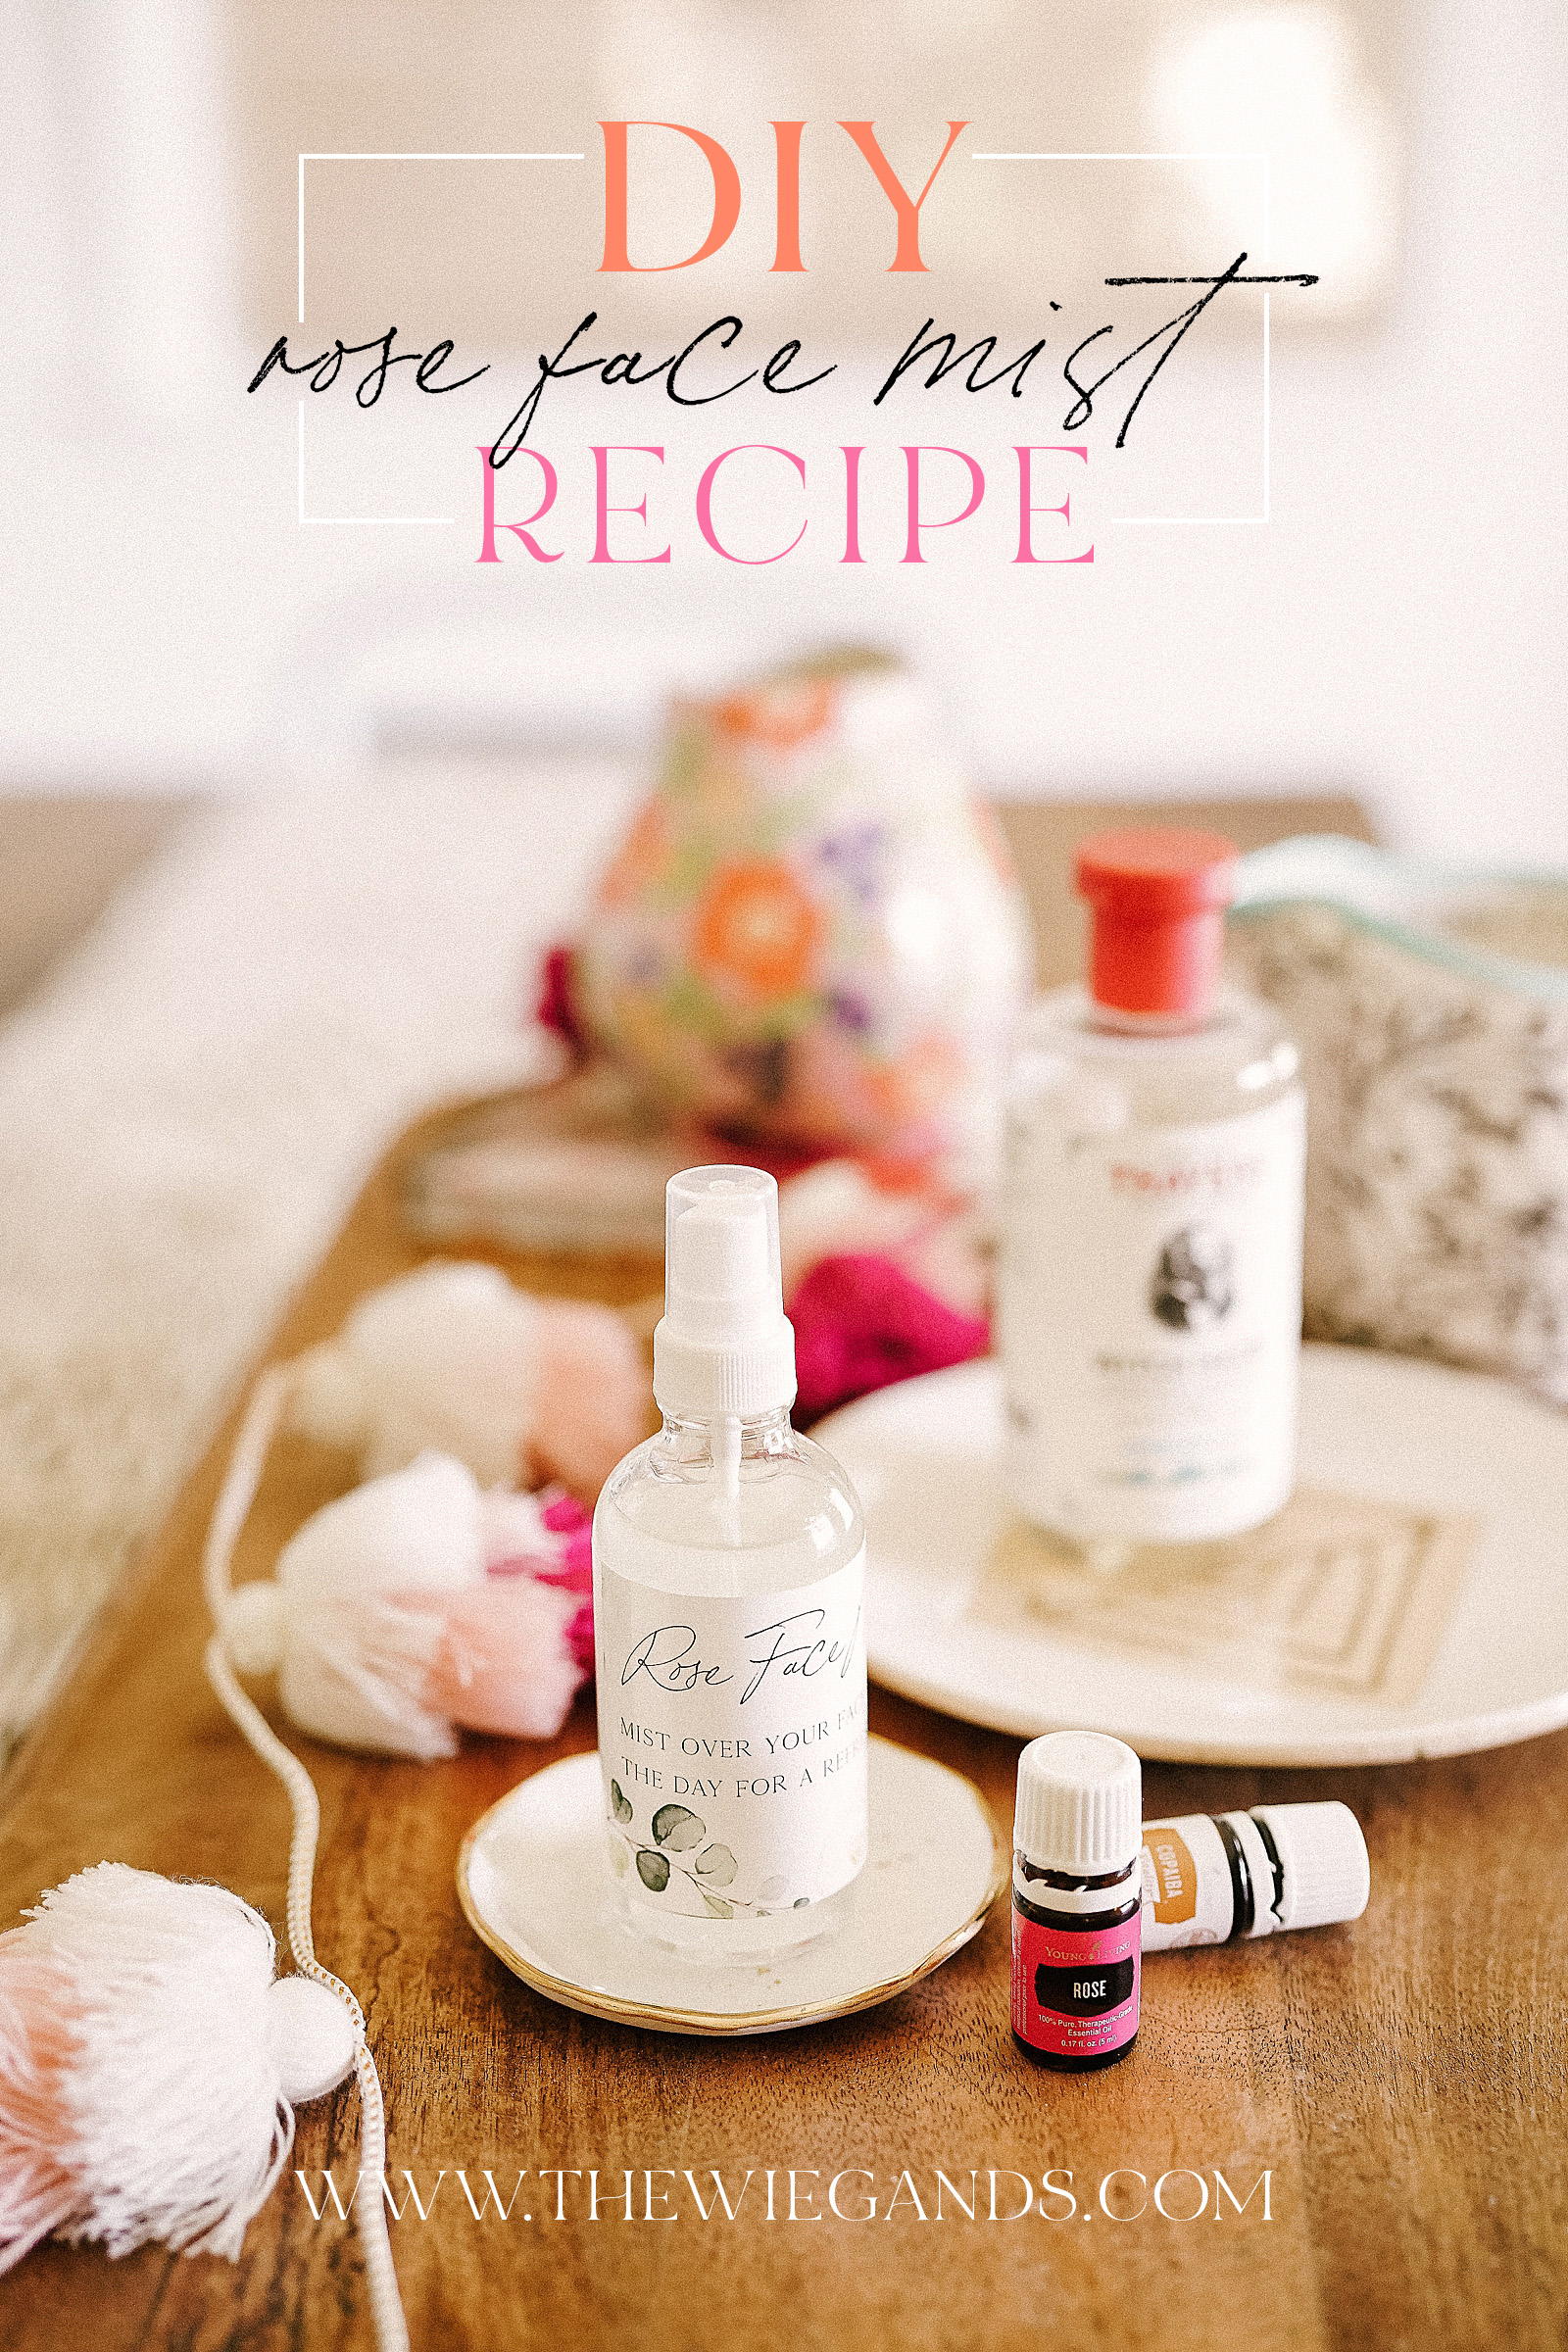 Refreshing Diy Rose Mist Spray With Free Printable Casey Wiegand Of The Wiegands